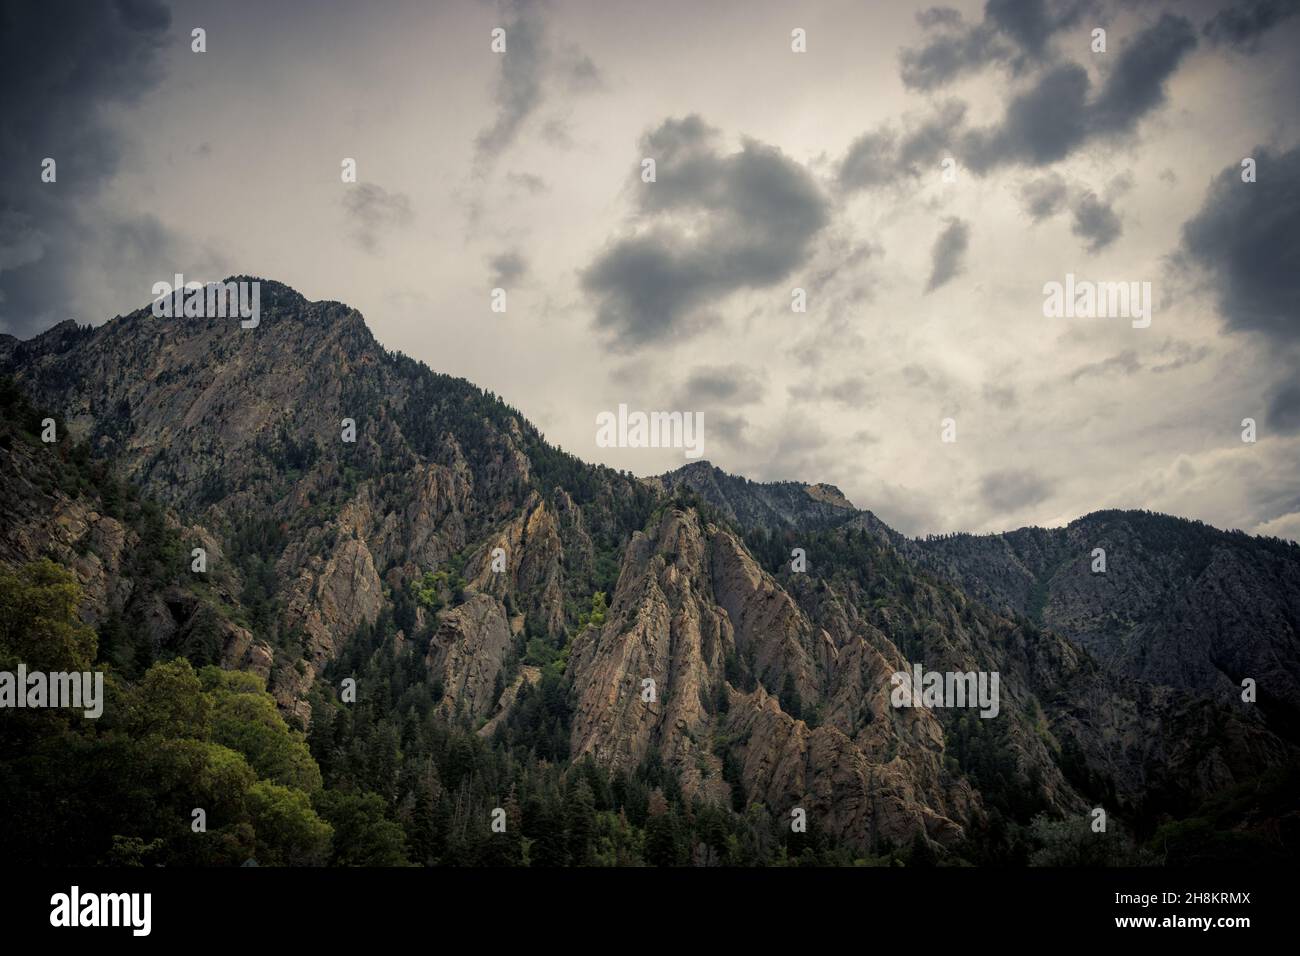 Scenic view of mountain scenery in a cloudy sky in Big Cottonwood Canyon, Salt Lake City, Utah, USA Stock Photo